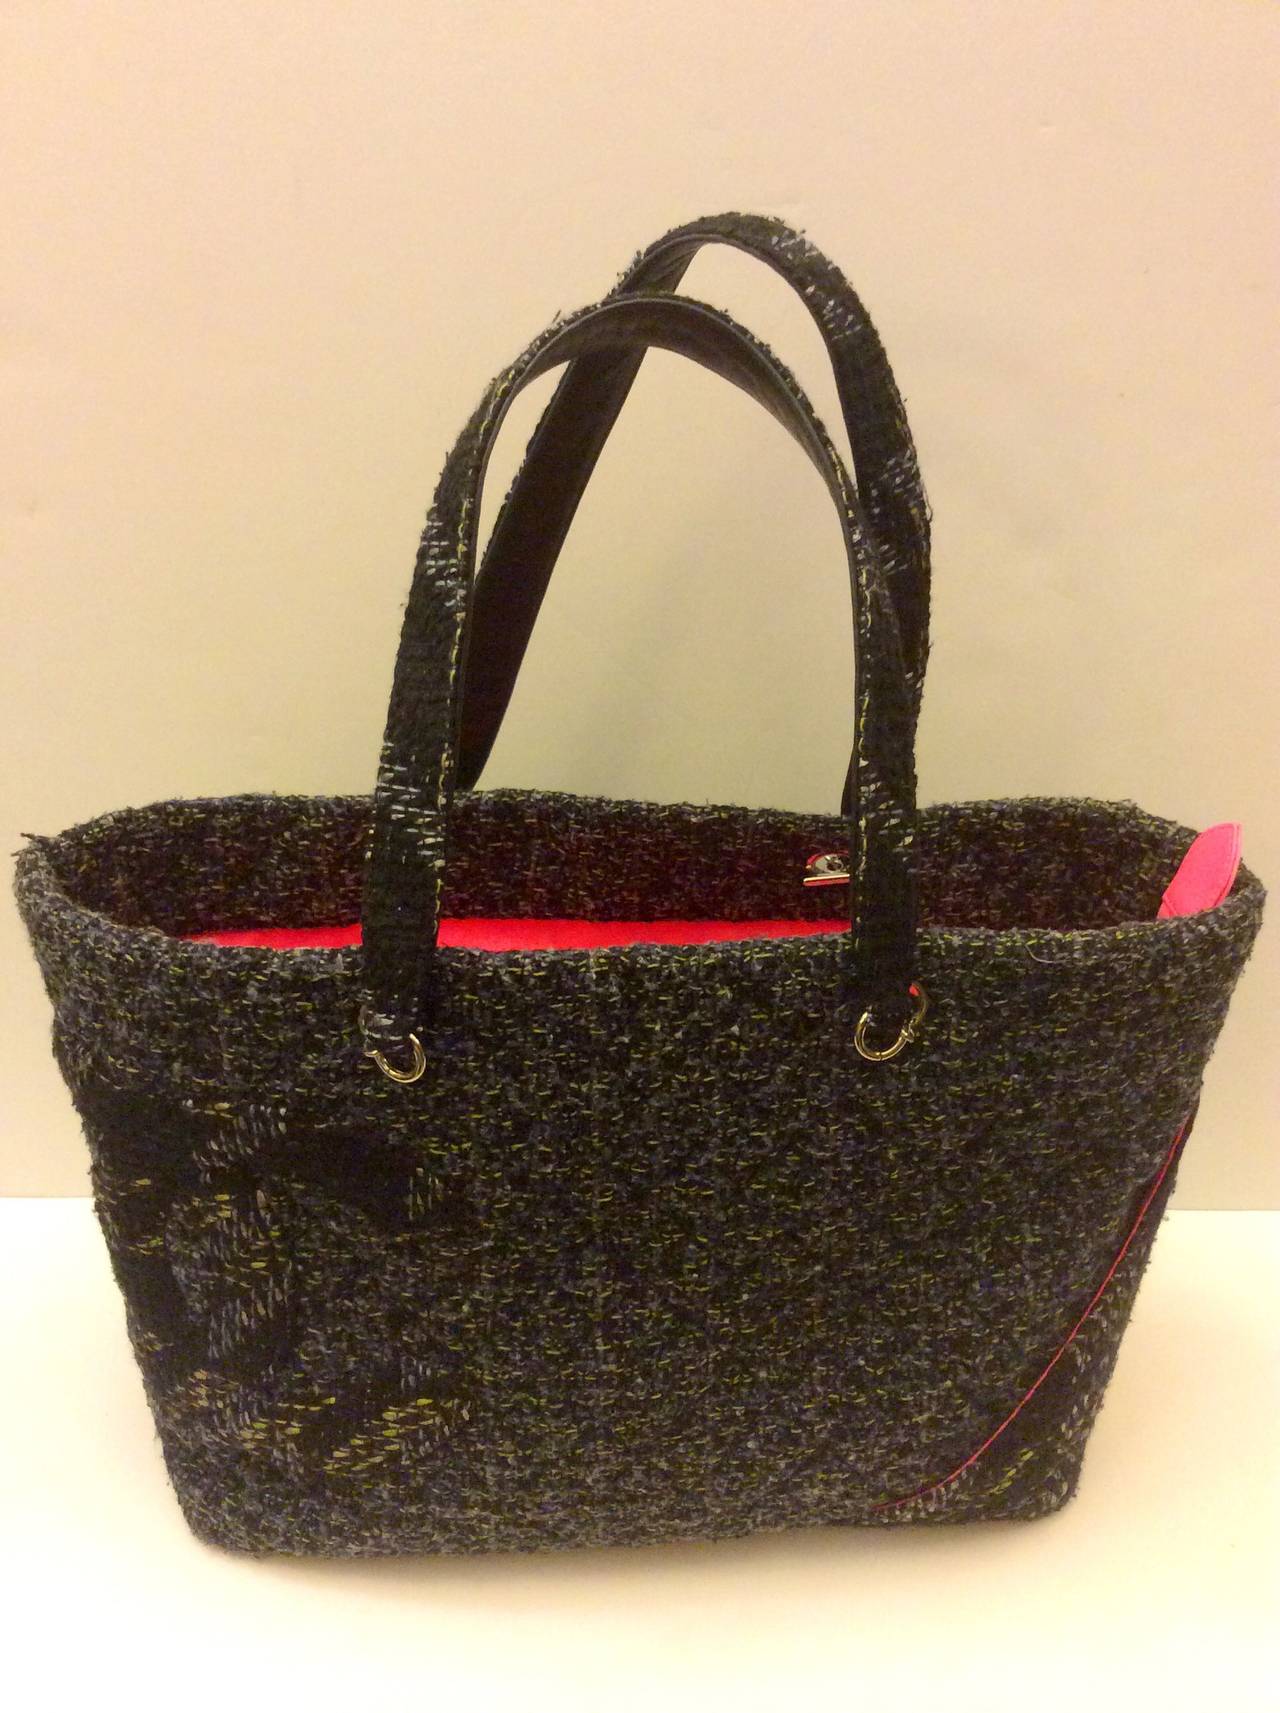 Women's Chanel Quilted Tweed Cambon Tote Handbag